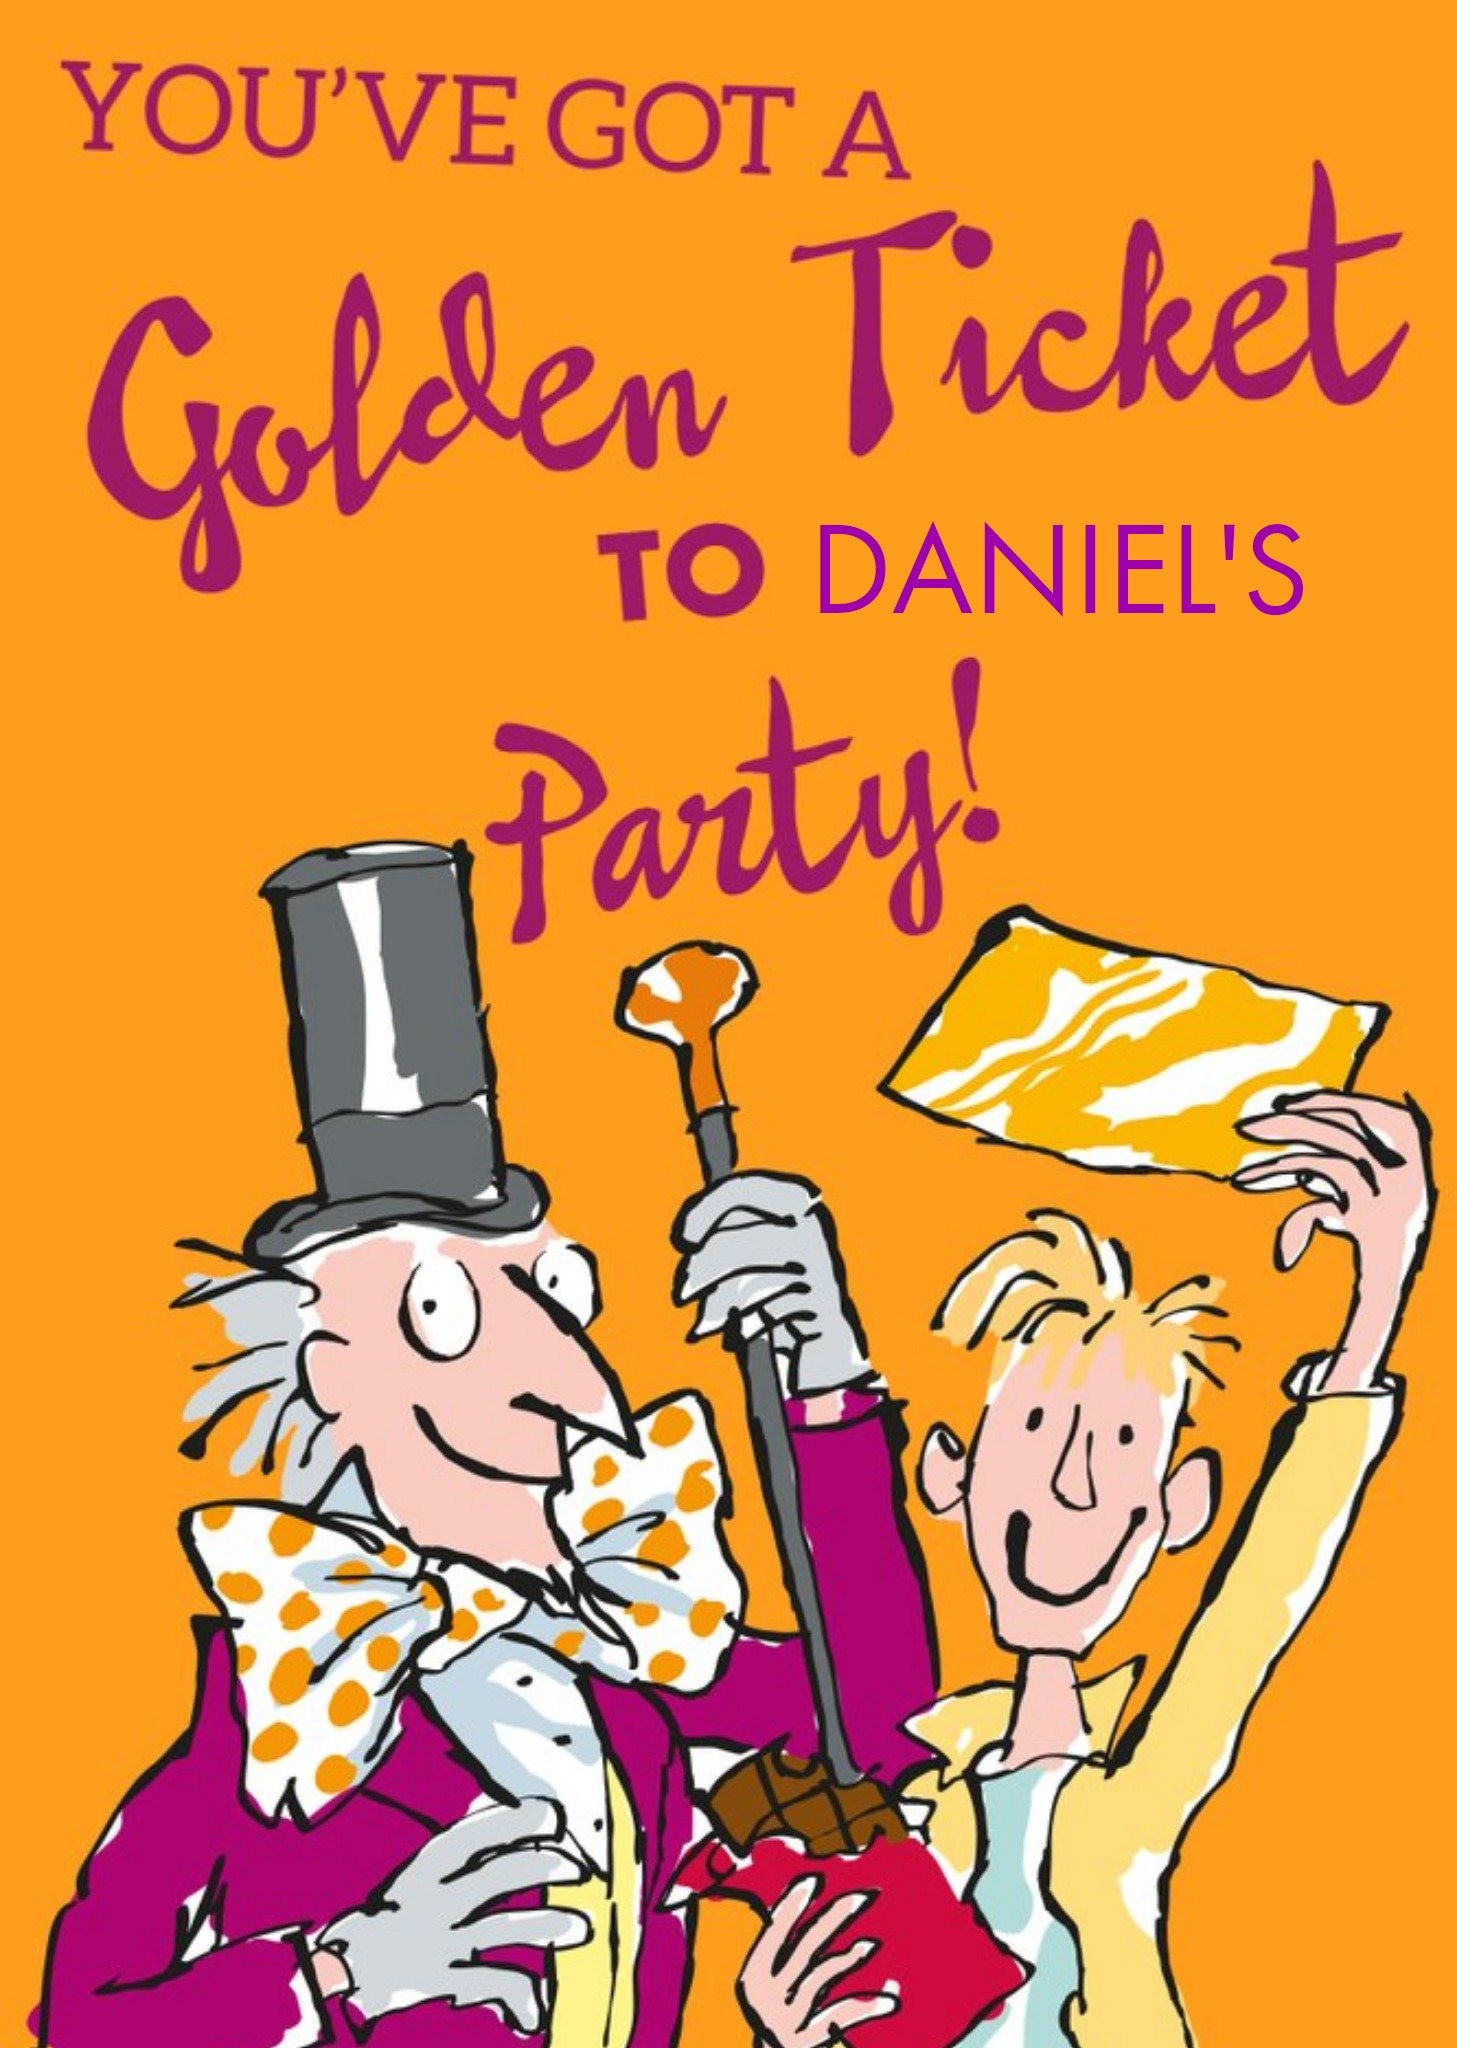 Other Willy Wonka Youve Got A Golden Ticket Birthday Invitation Ecard